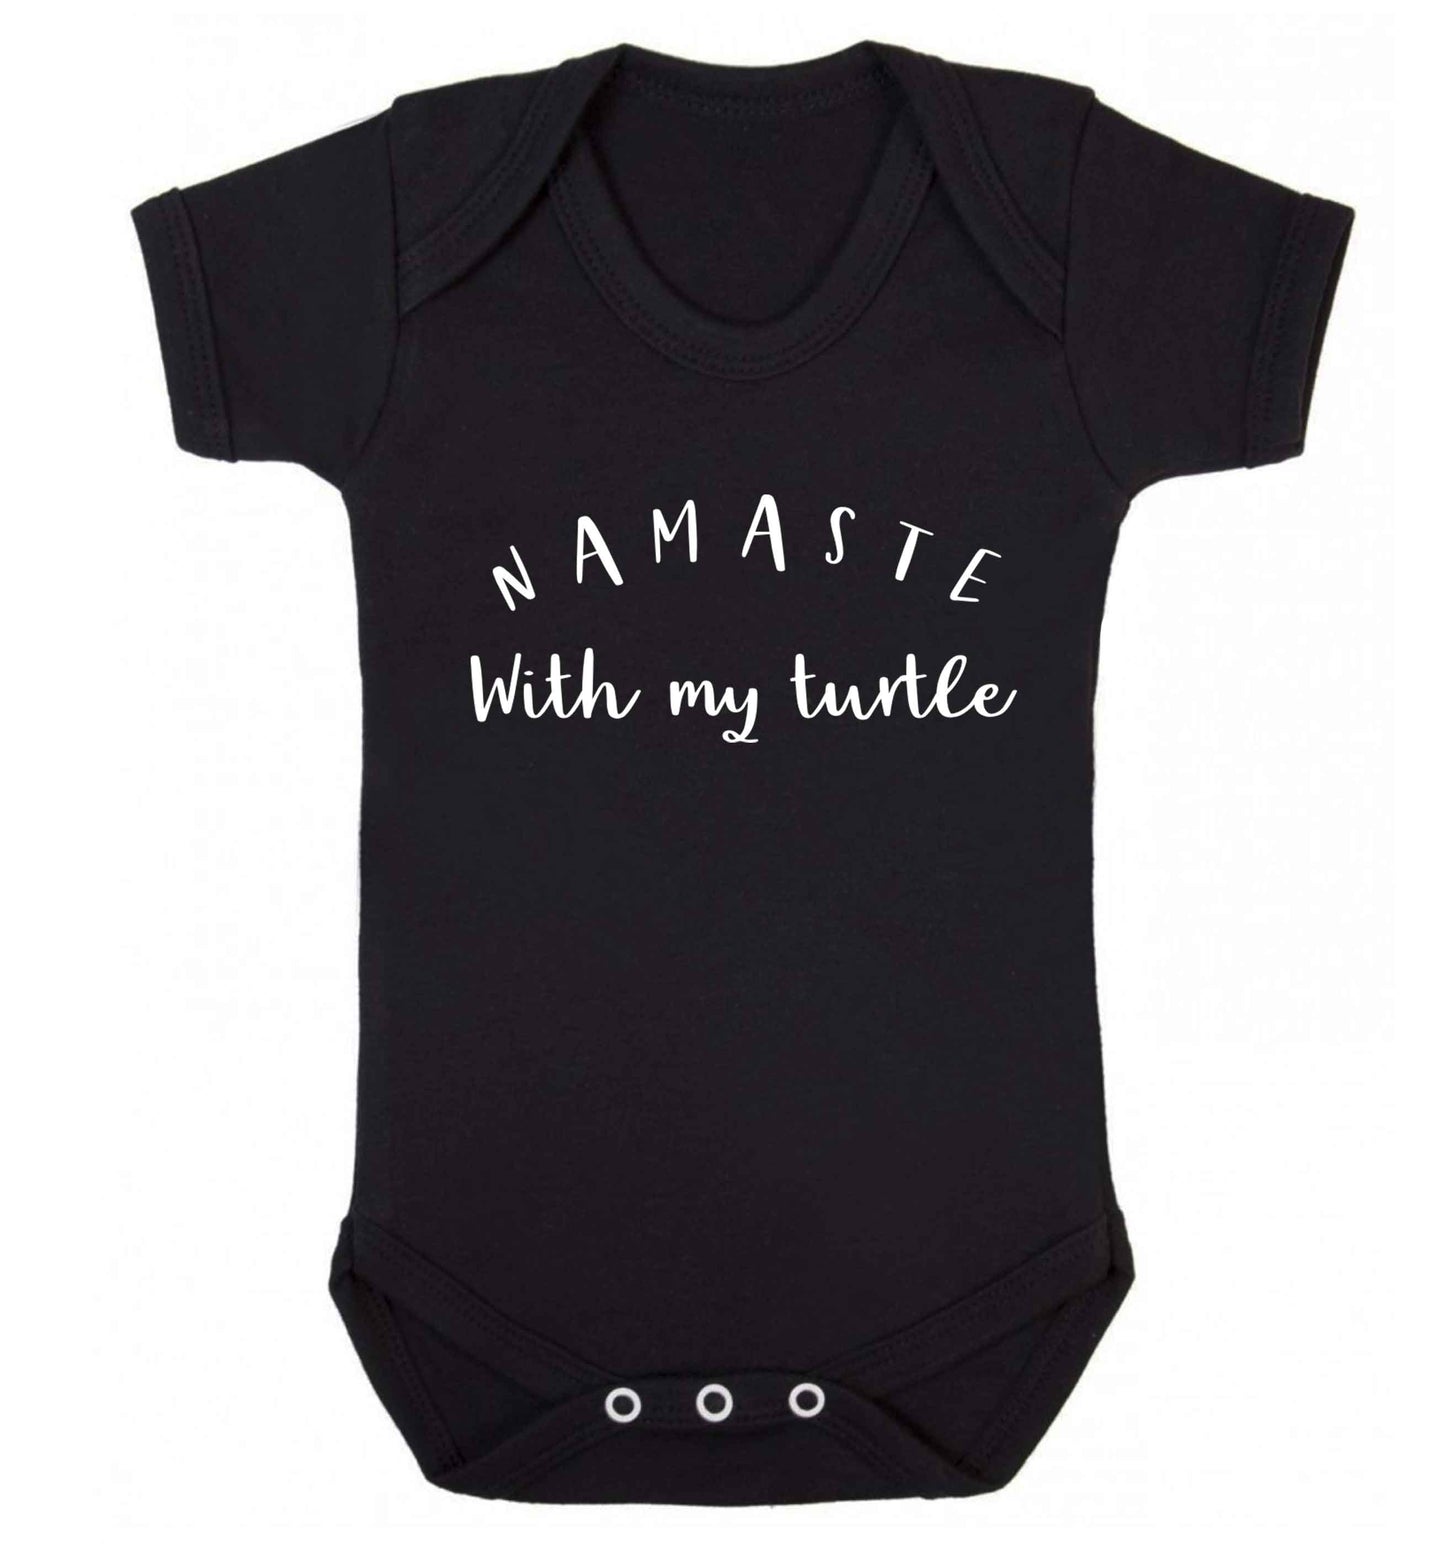 Namaste with my turtle Baby Vest black 18-24 months